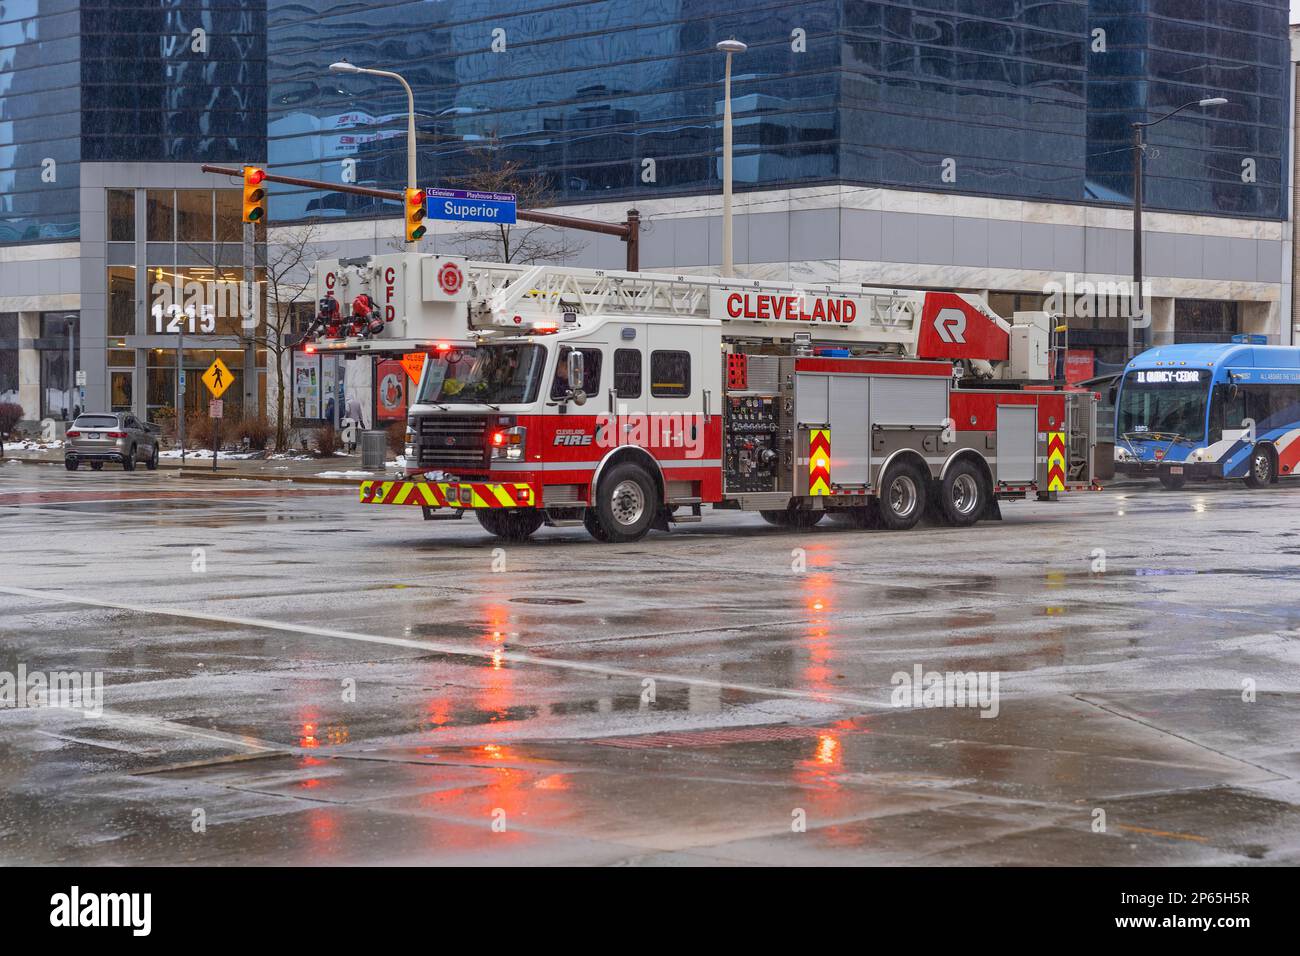 Cleveland, Ohio, USA - January 25, 2023: A fire truck crossing an intersection on an emergency call in downtown district. Stock Photo